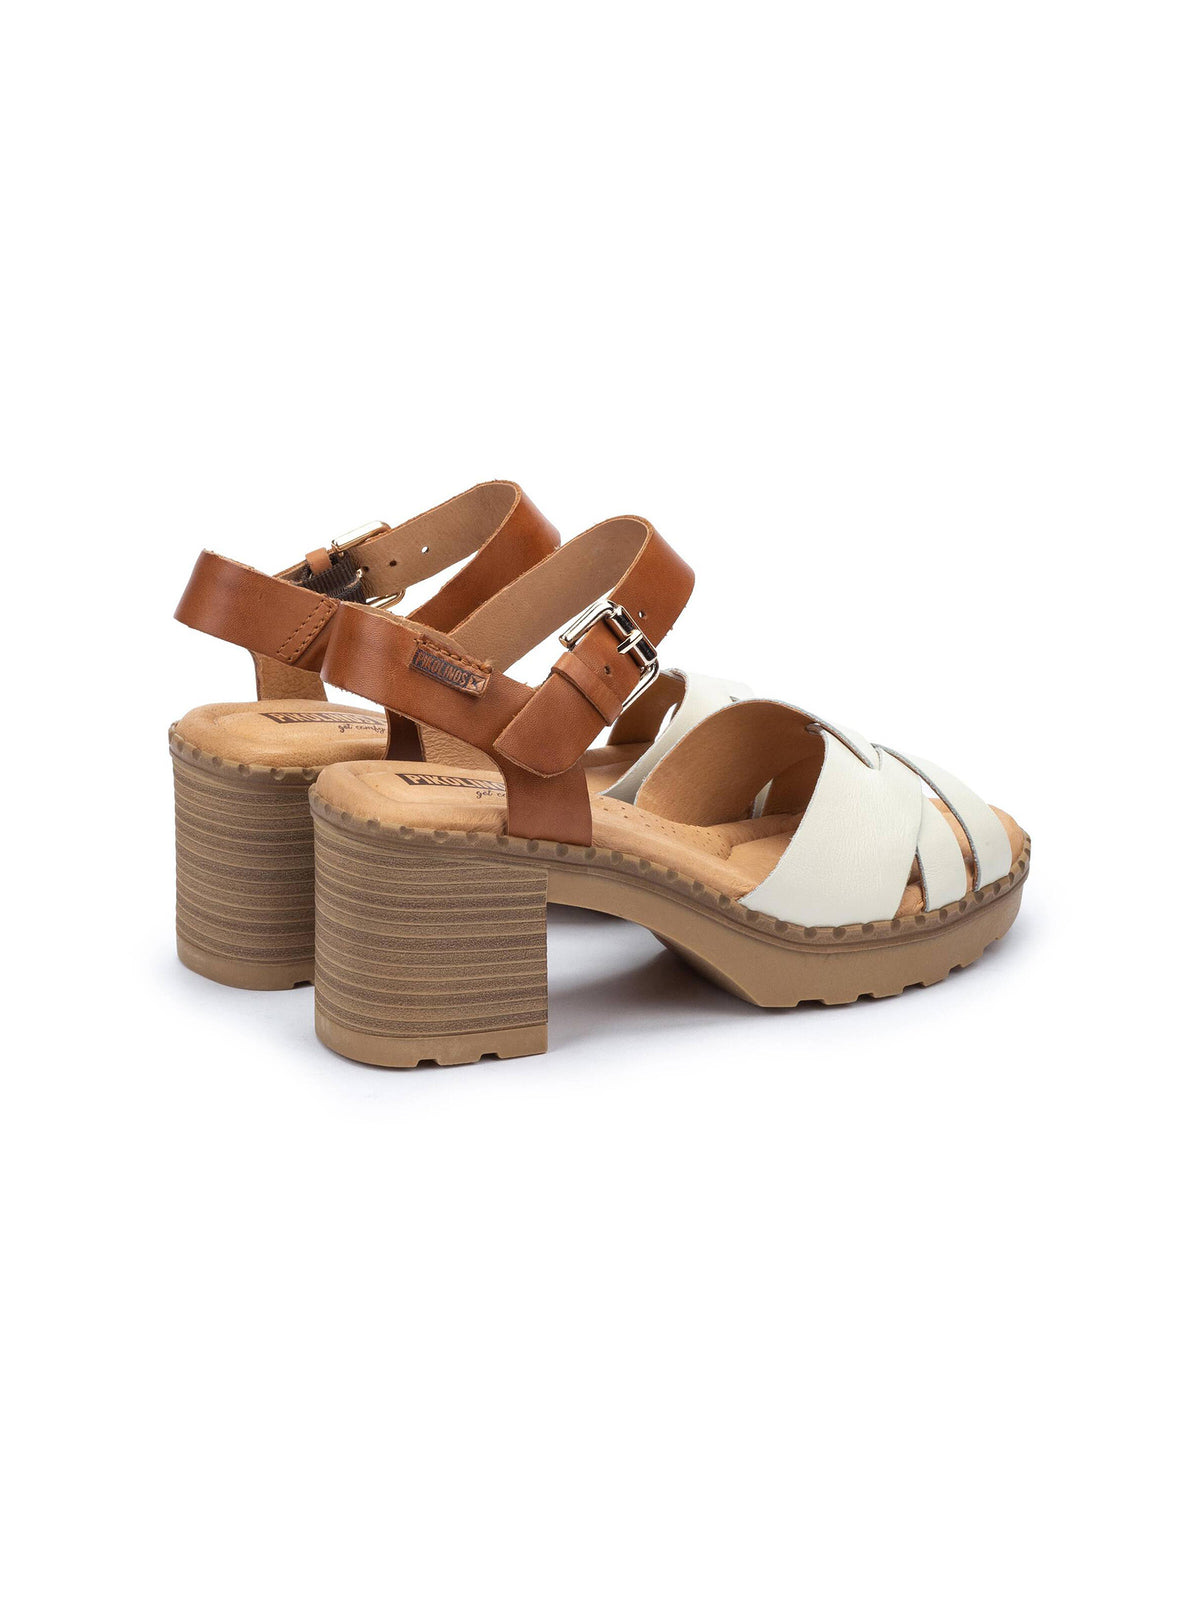 pikolinos canarias braided heel sandals in nata-pair back side view